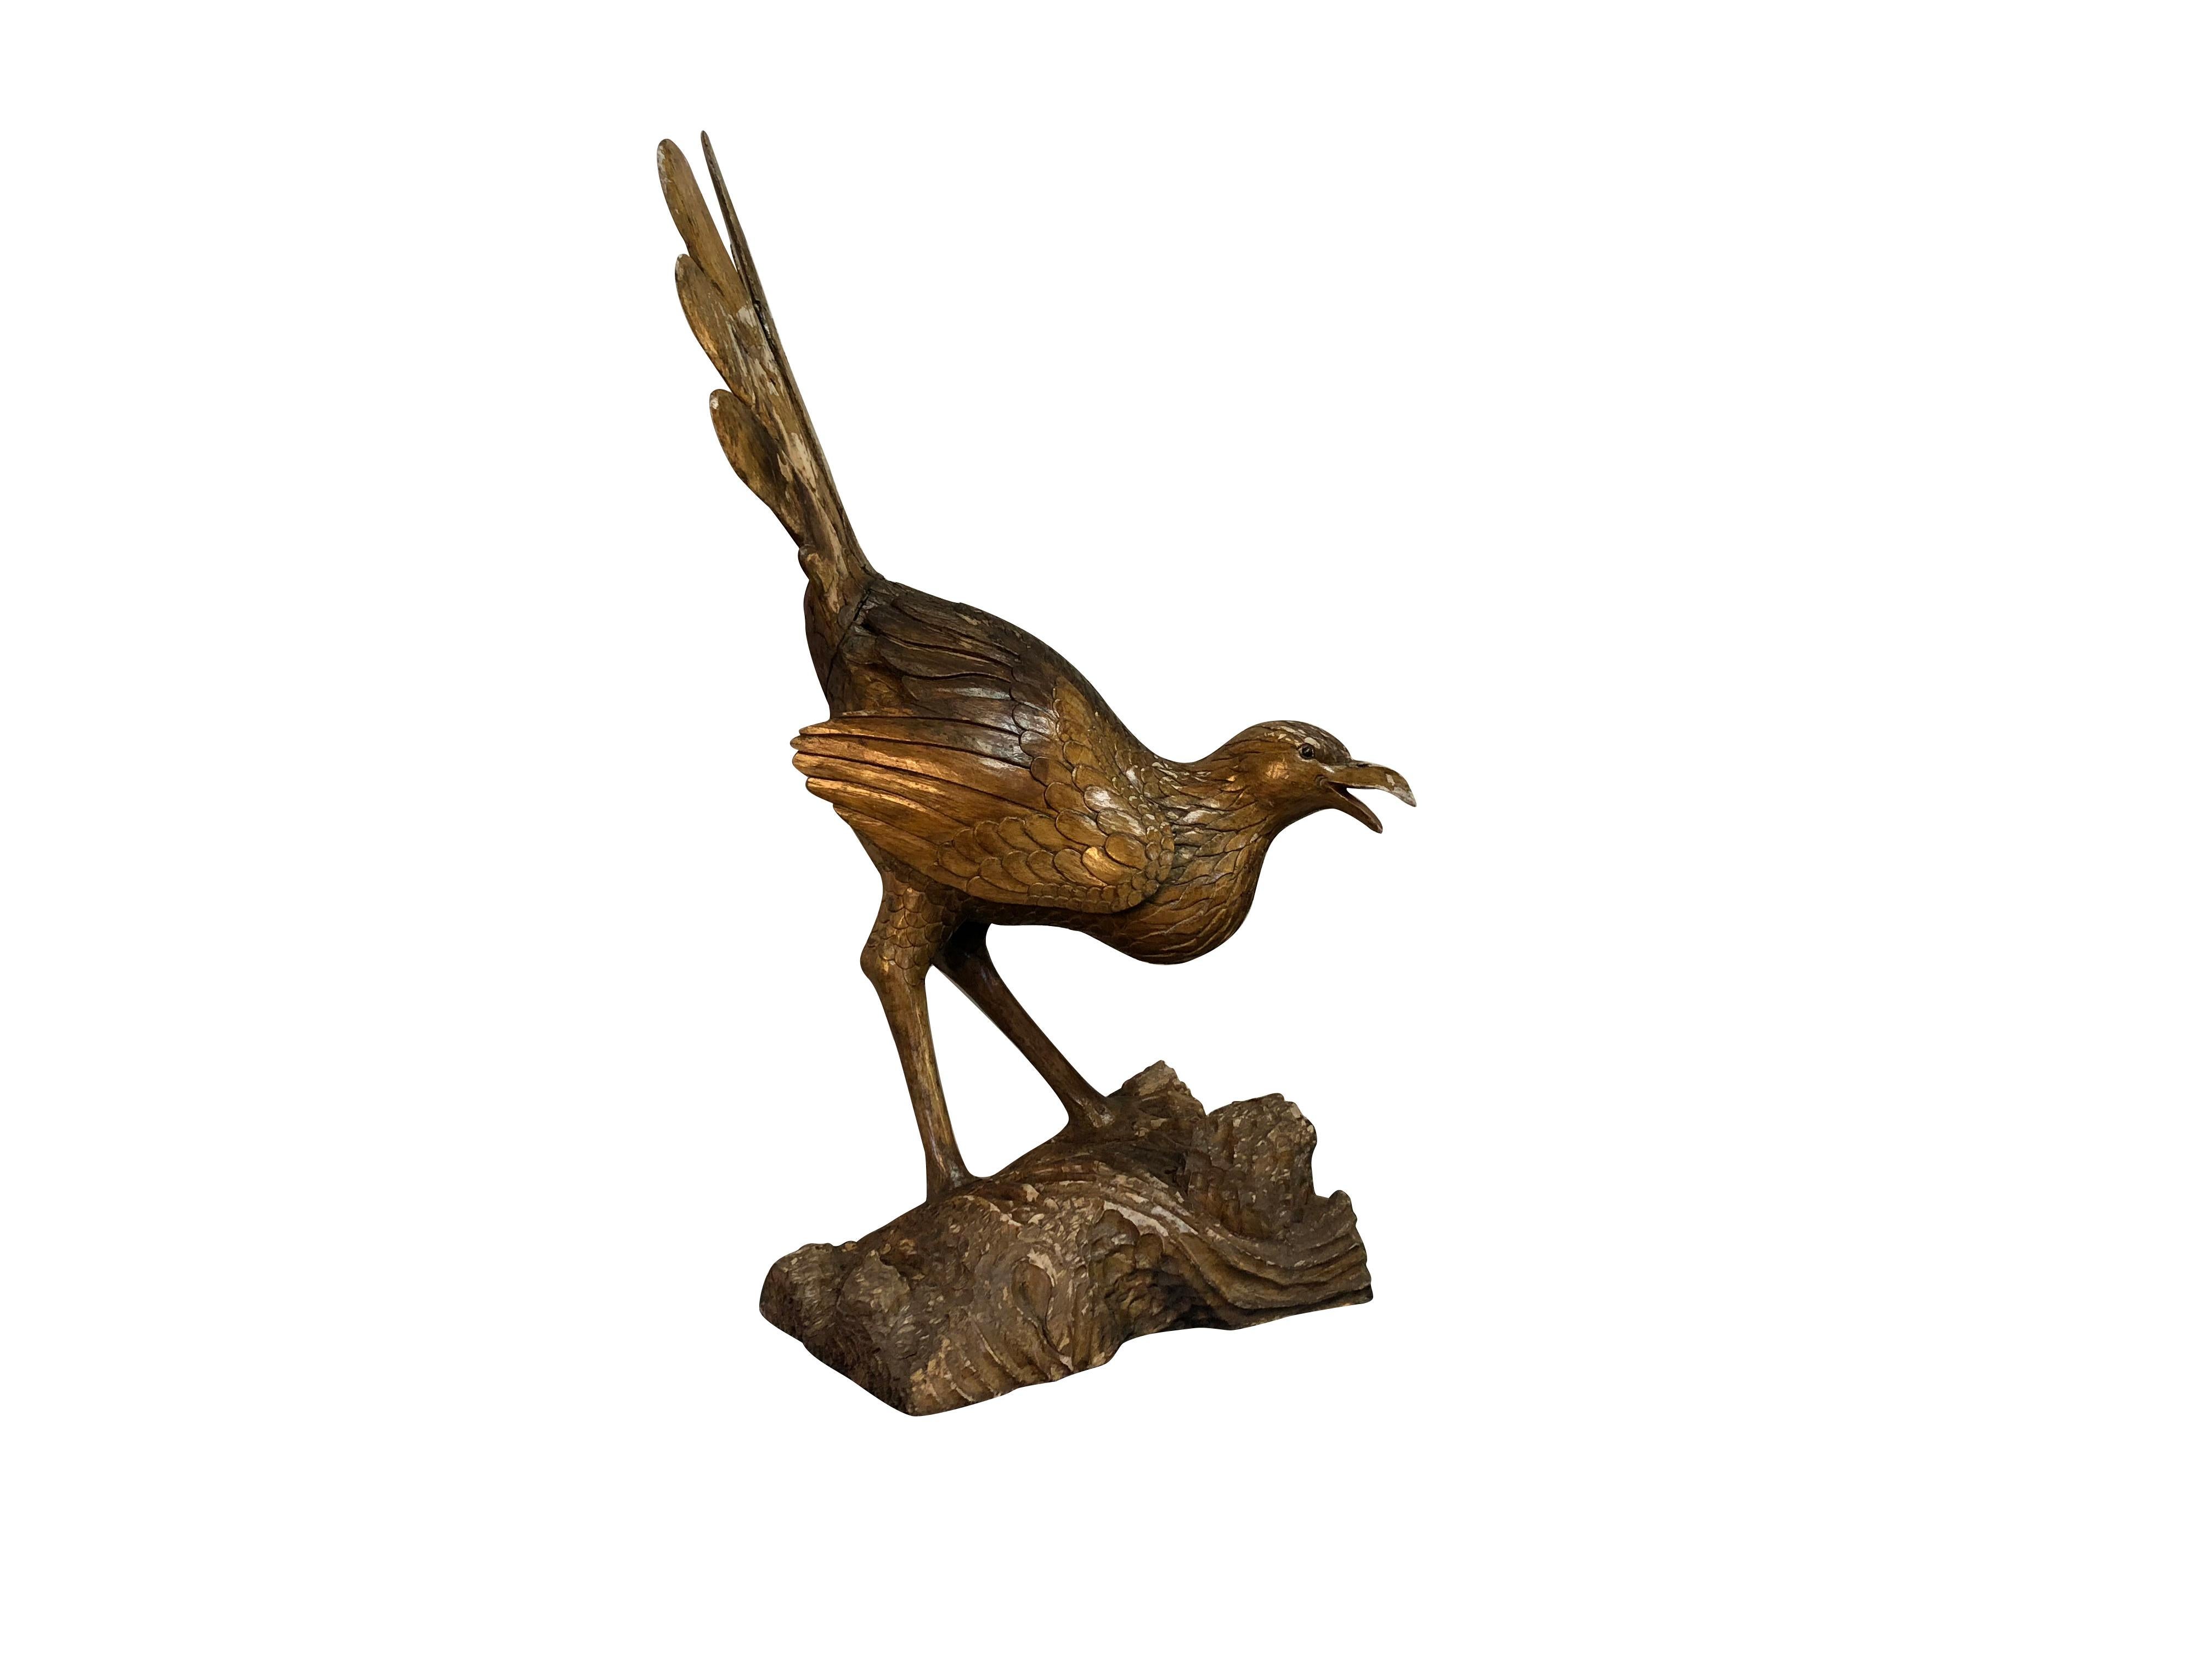 A gold, antique French hand carved mythological bird made entirely of Cypresswood, very detailed craftsmanship and carving. The large table décor is in good condition. Wear consistent with age and use, circa 1860, France.